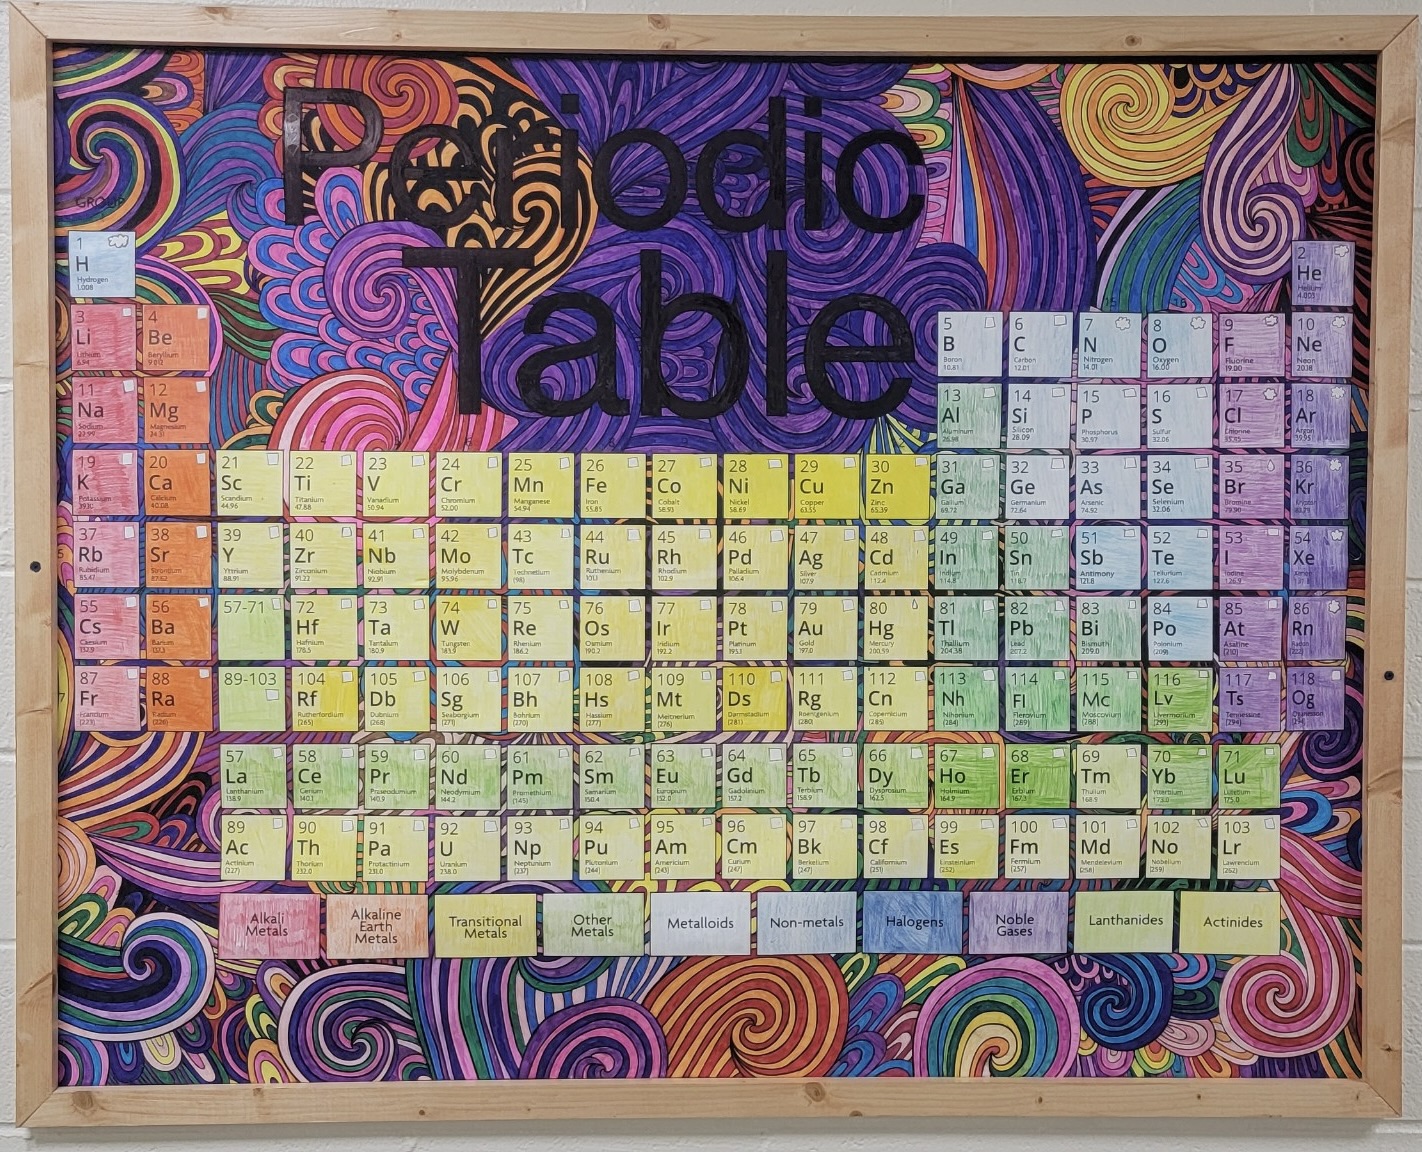 4'x5' poster of periodic table colored by Summit students